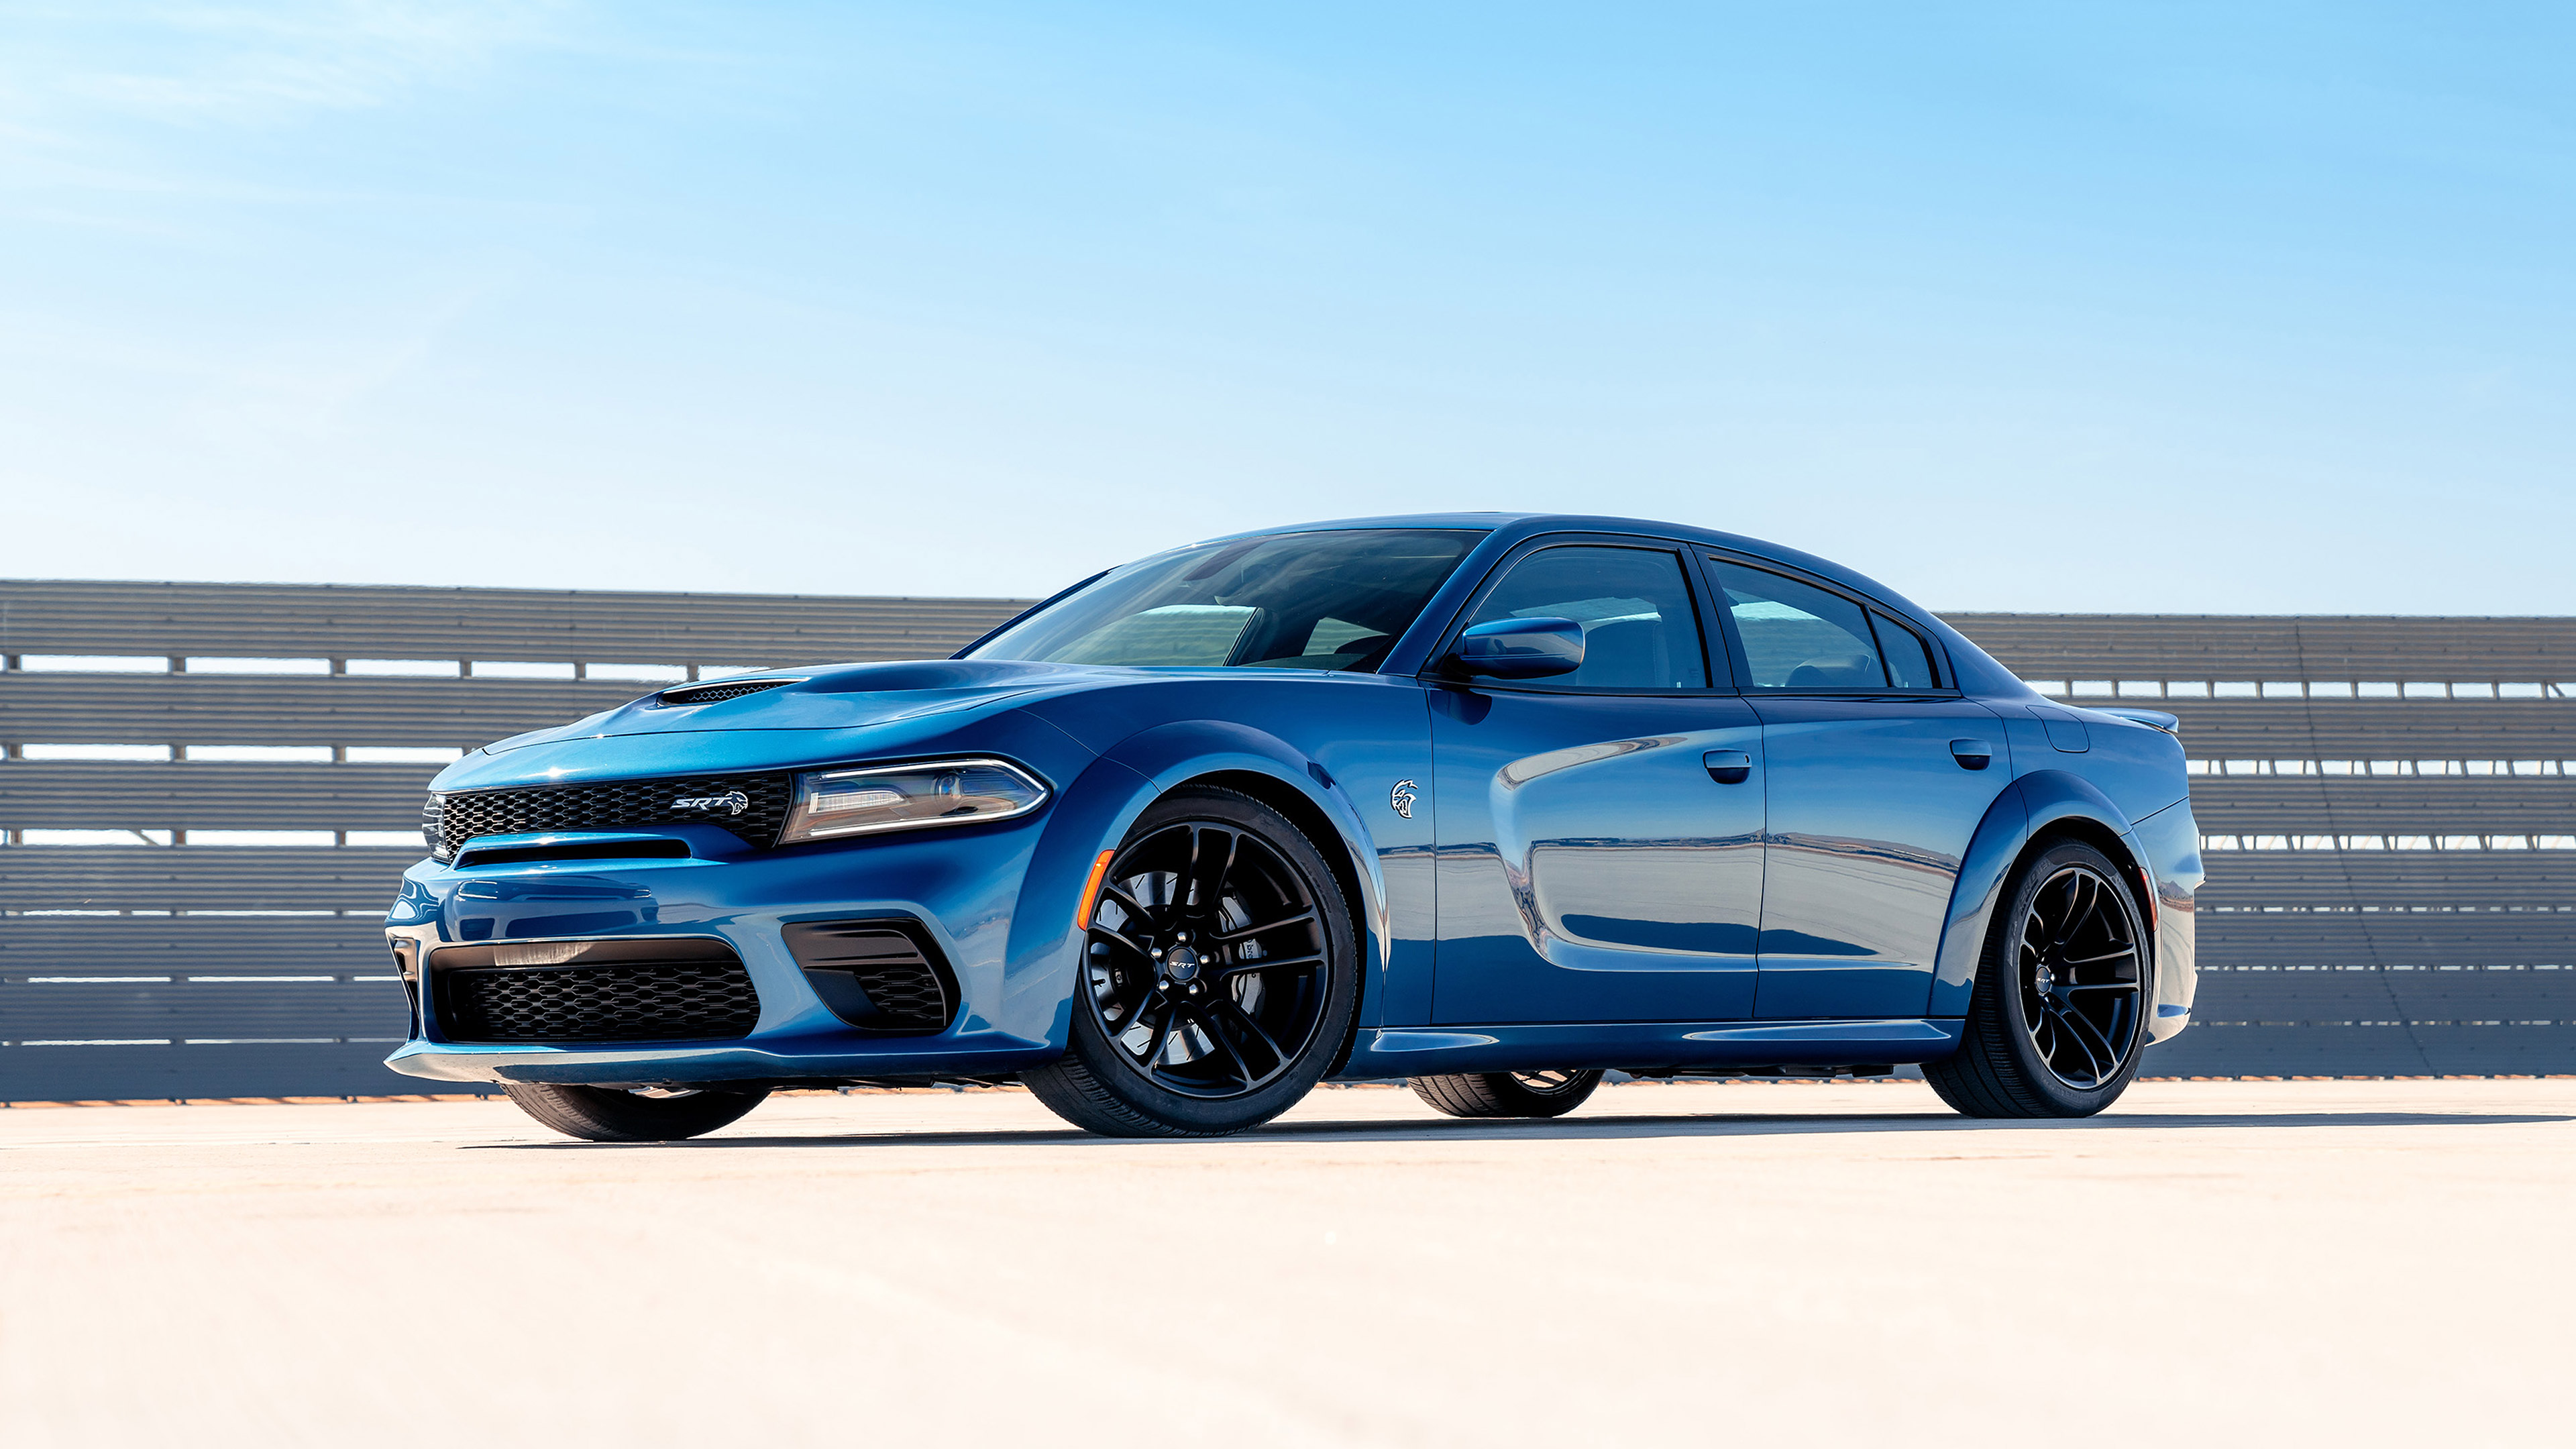 General 3840x2160 Dodge Charger vehicle car Dodge American cars muscle cars Stellantis